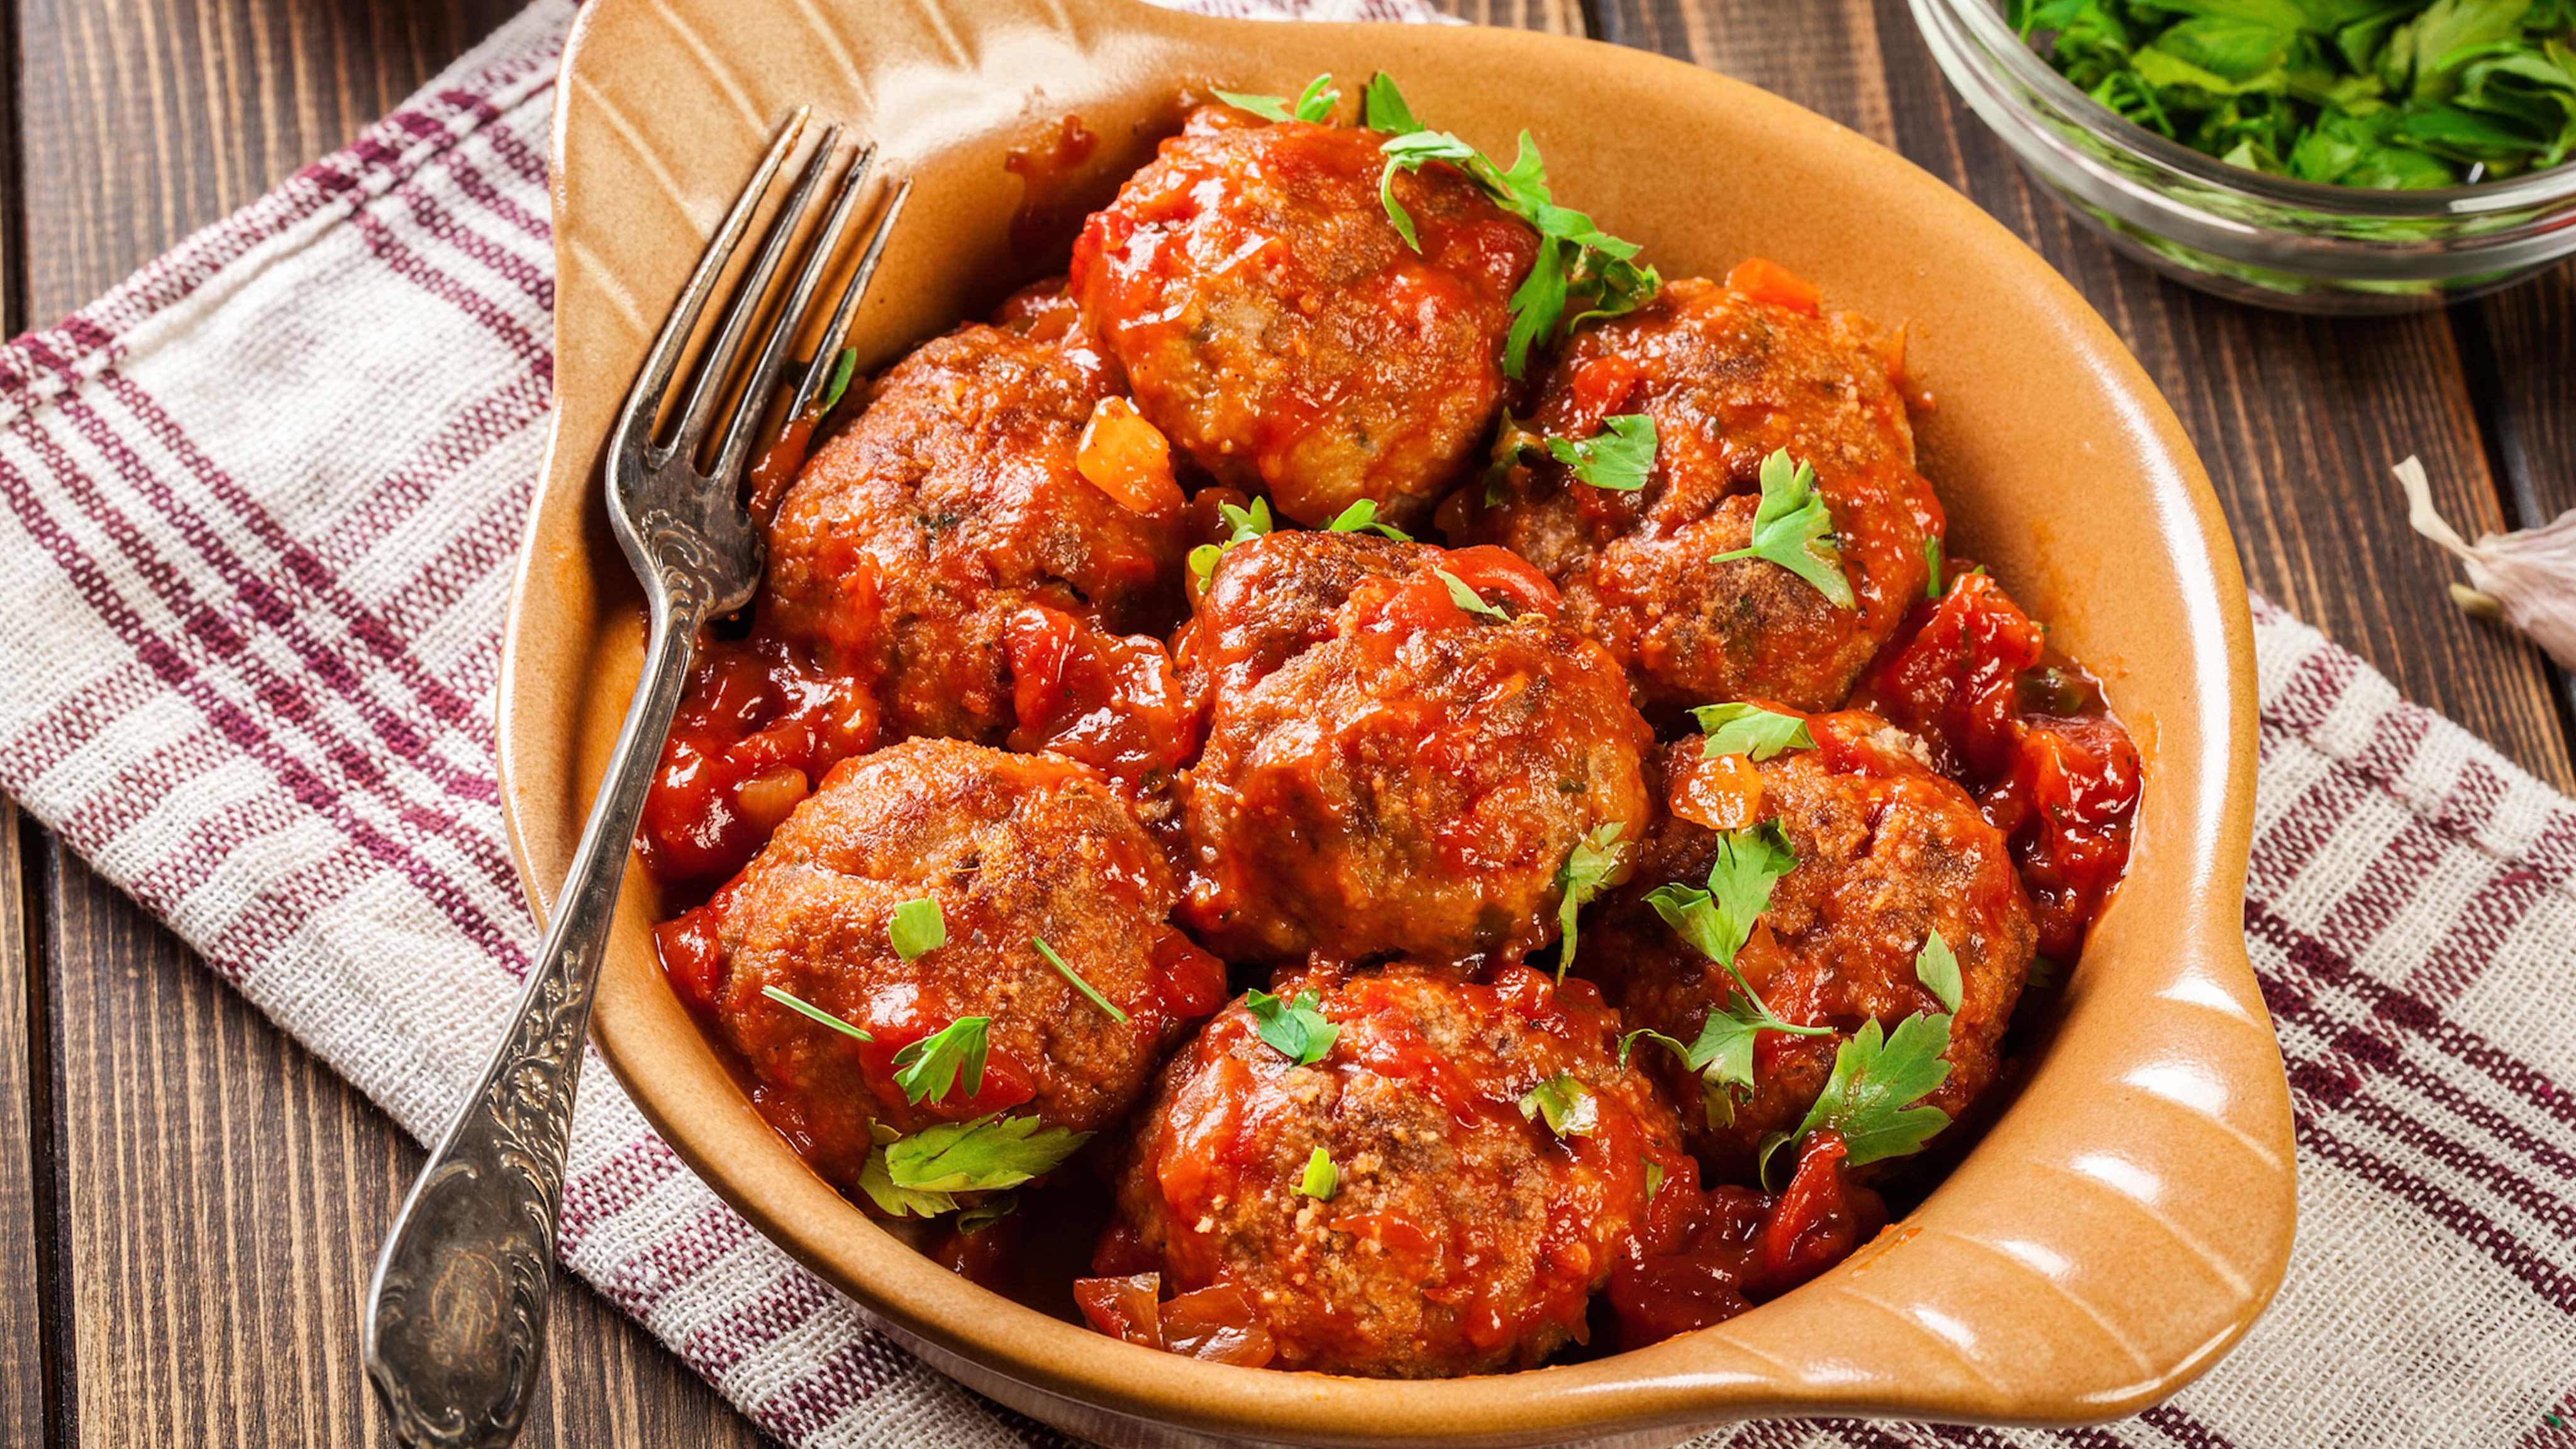 Image for Recipe Baked Meatballs in Tomato Herb Sauce